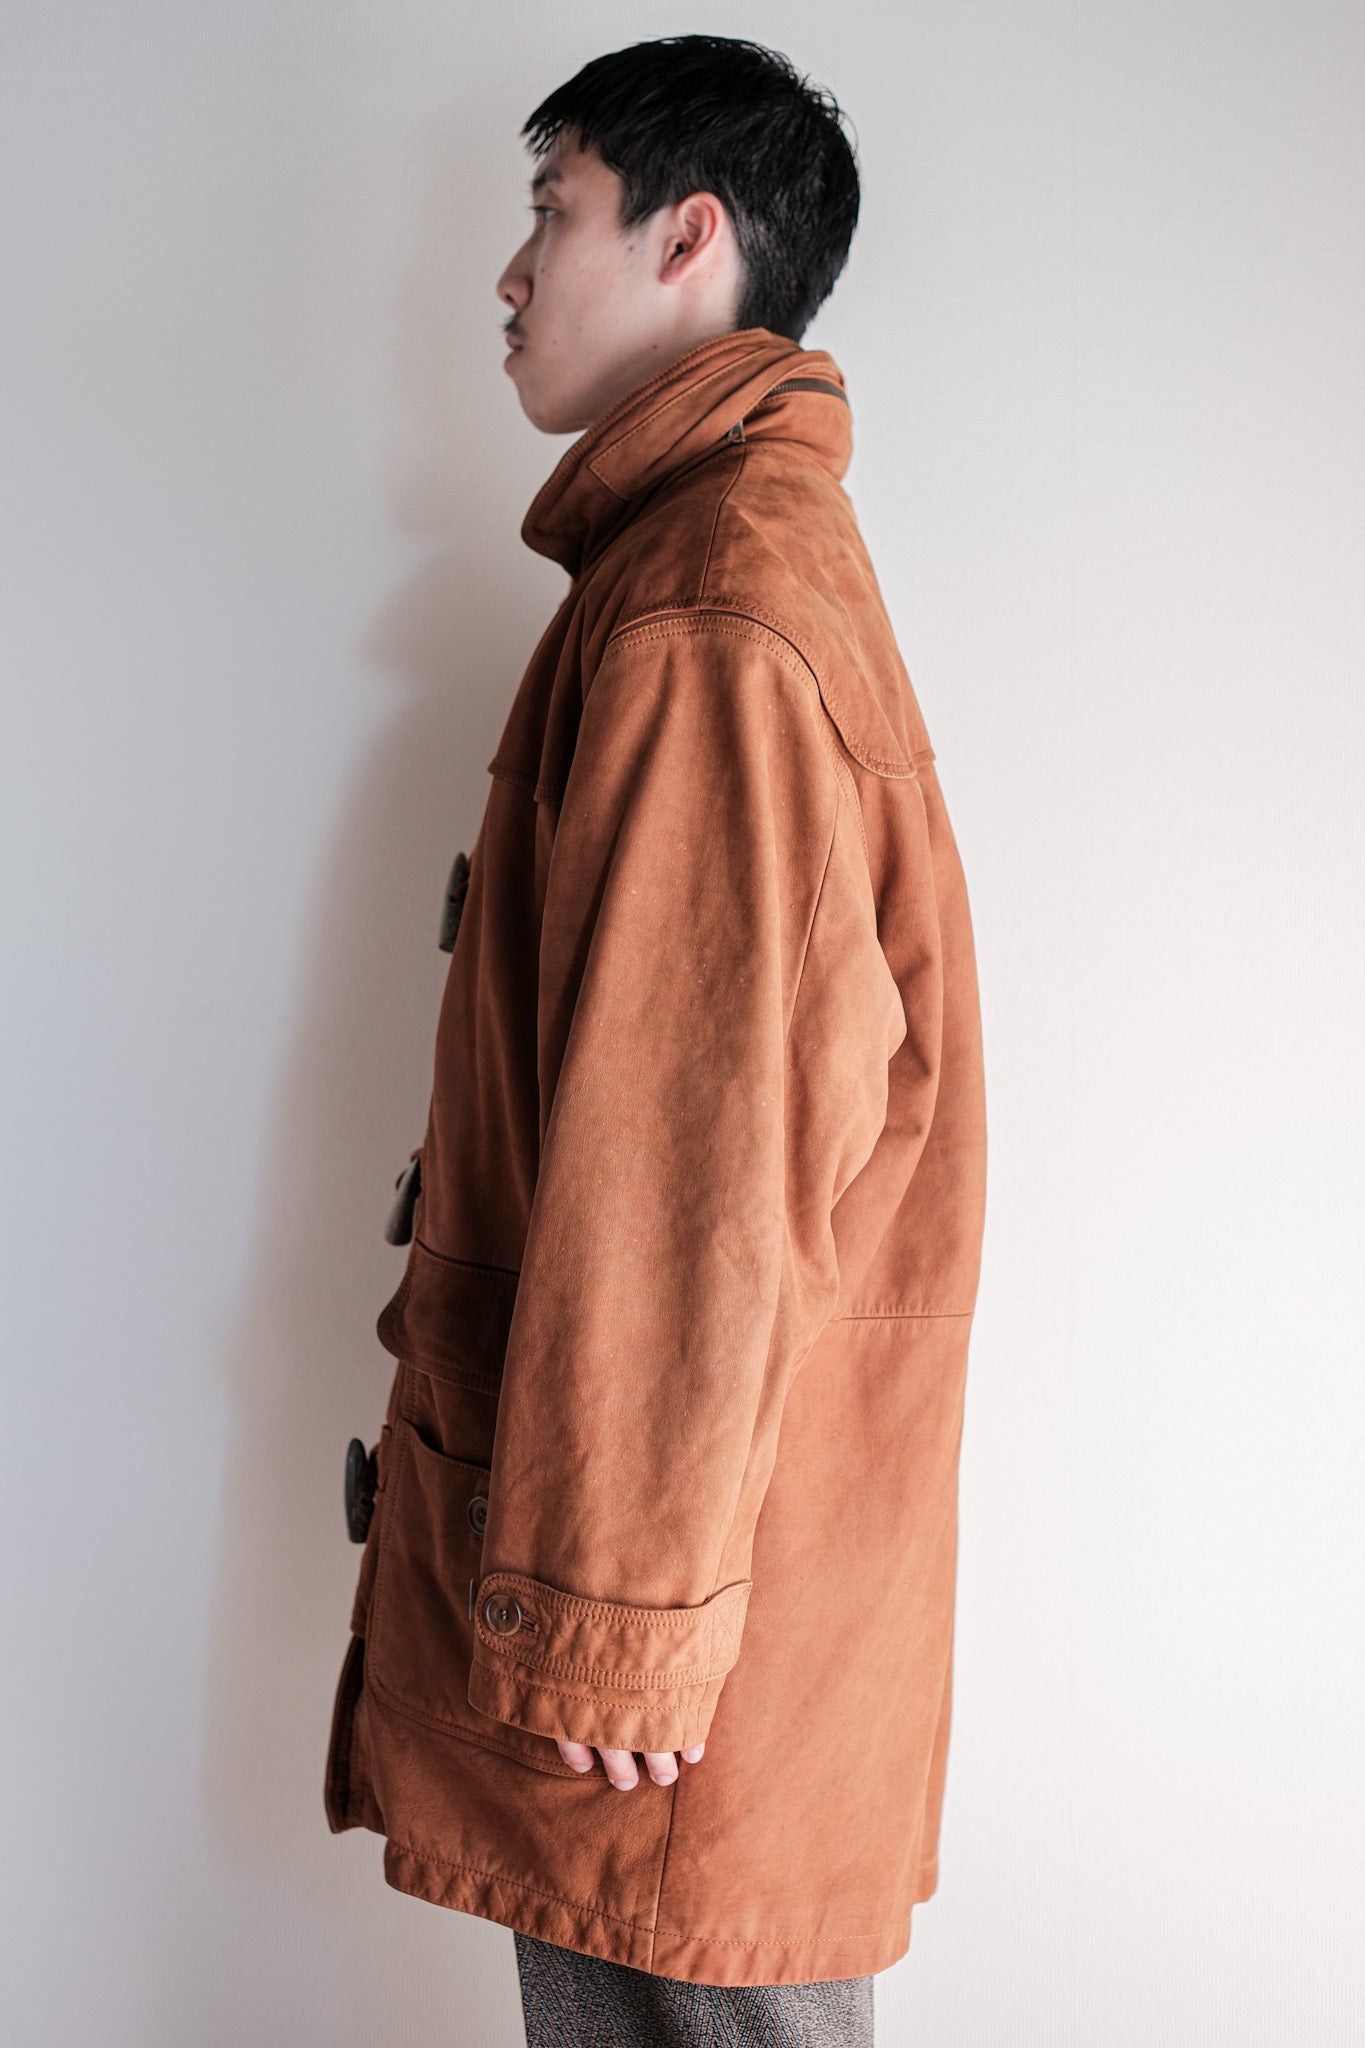 [~ 90's] Old Invertere Leather Duffle Coat Size.xs